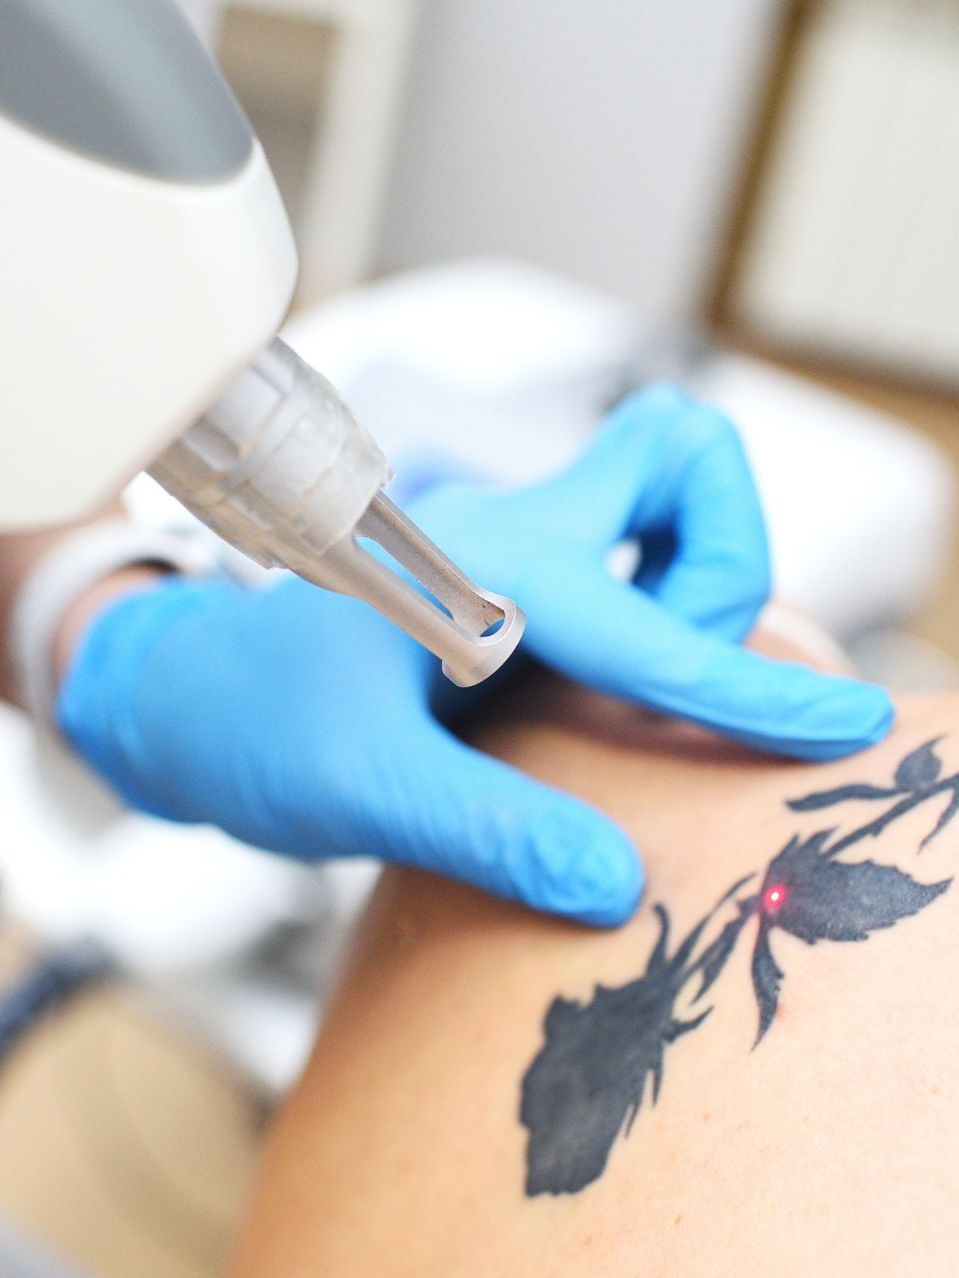 targeting tattoo for removal